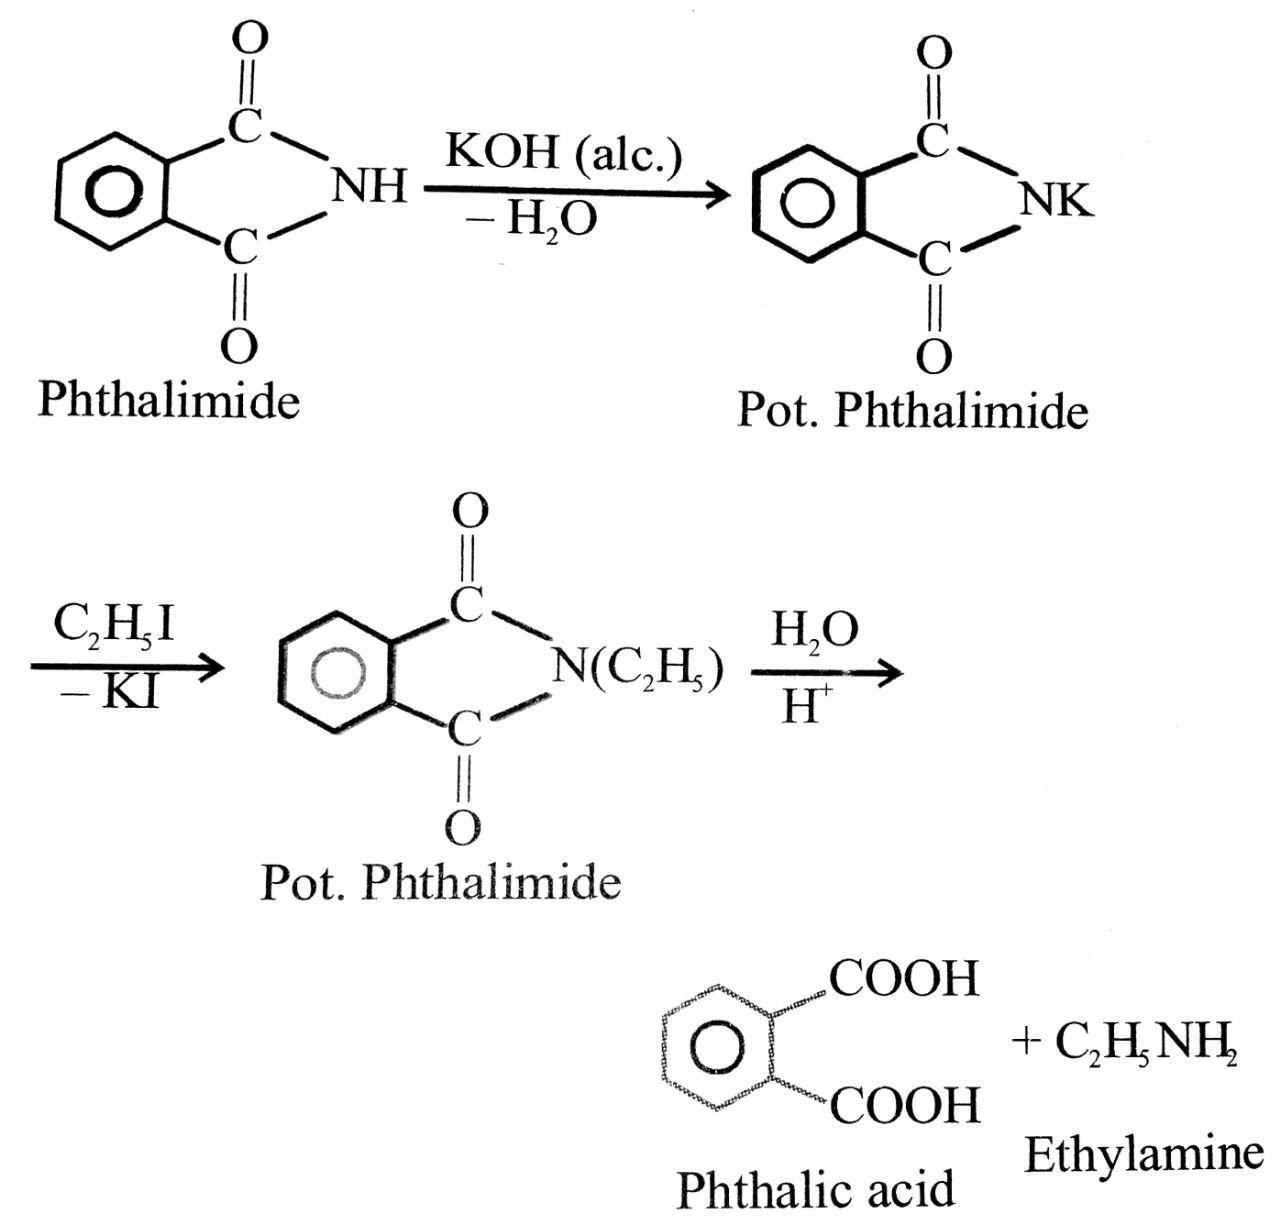 In this reaction phthalimide is converted into its potassium salt by